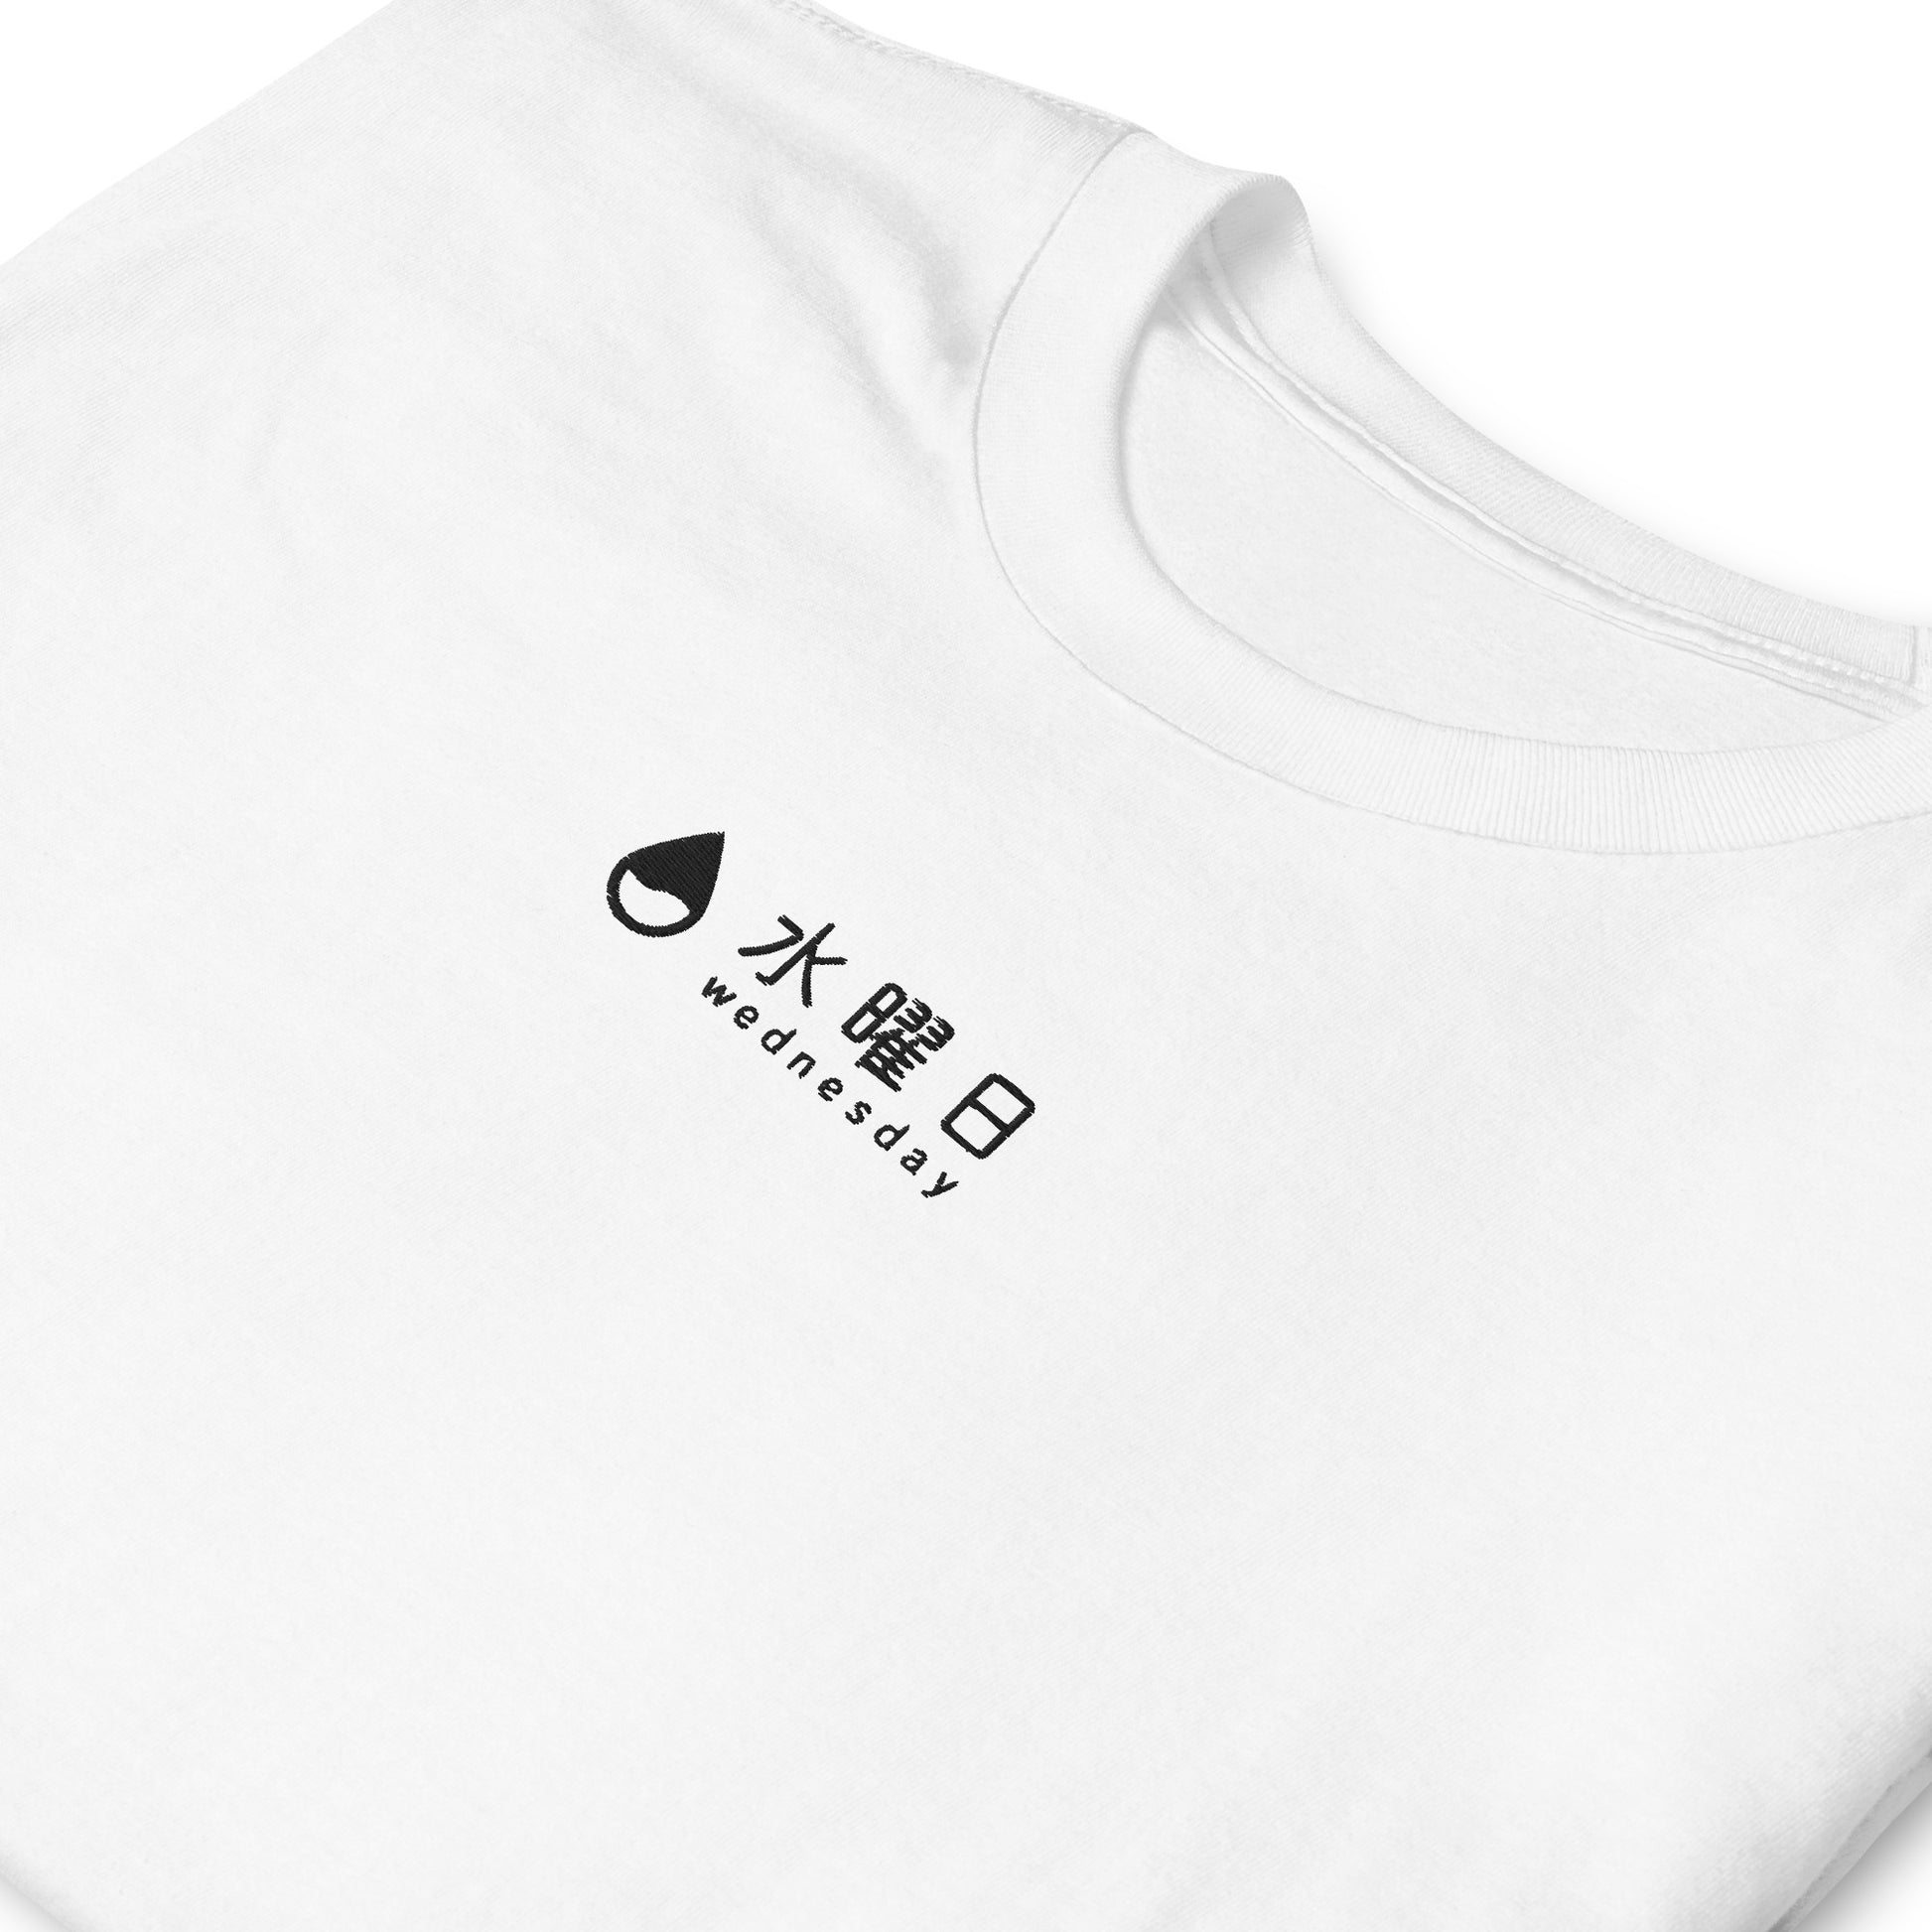 White High Quality Tee - Front Design with a white Embroidery "Wednesday" in Japanese and English  Edit alt text